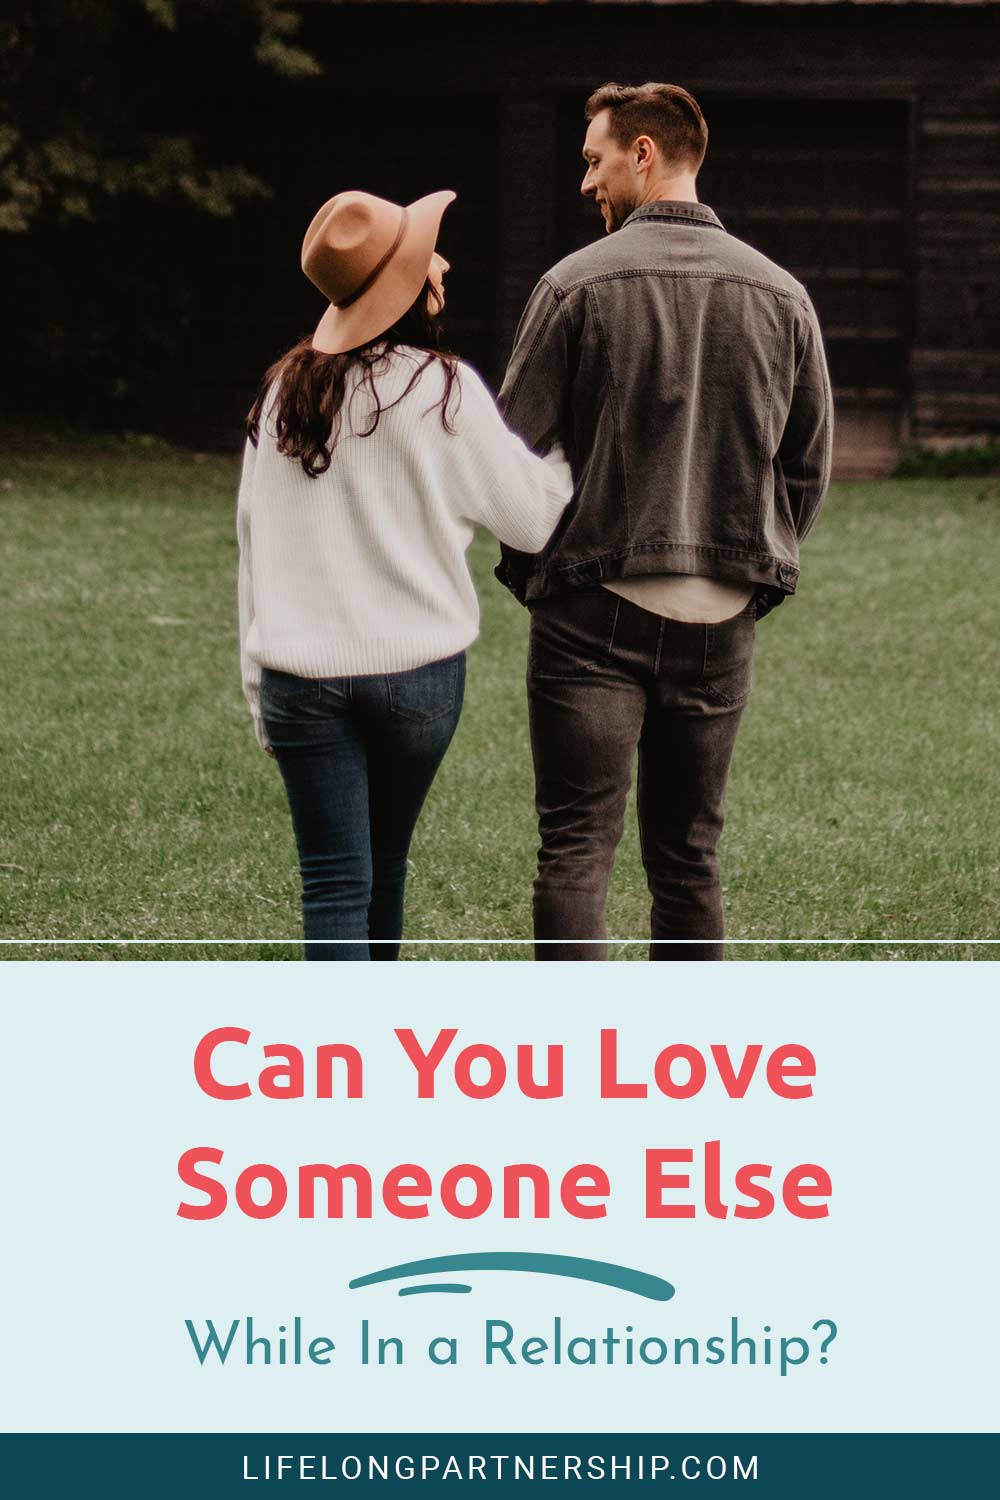 Couple holding their hands and smiling at each other - Can You Love Someone Else While In a Relationship?